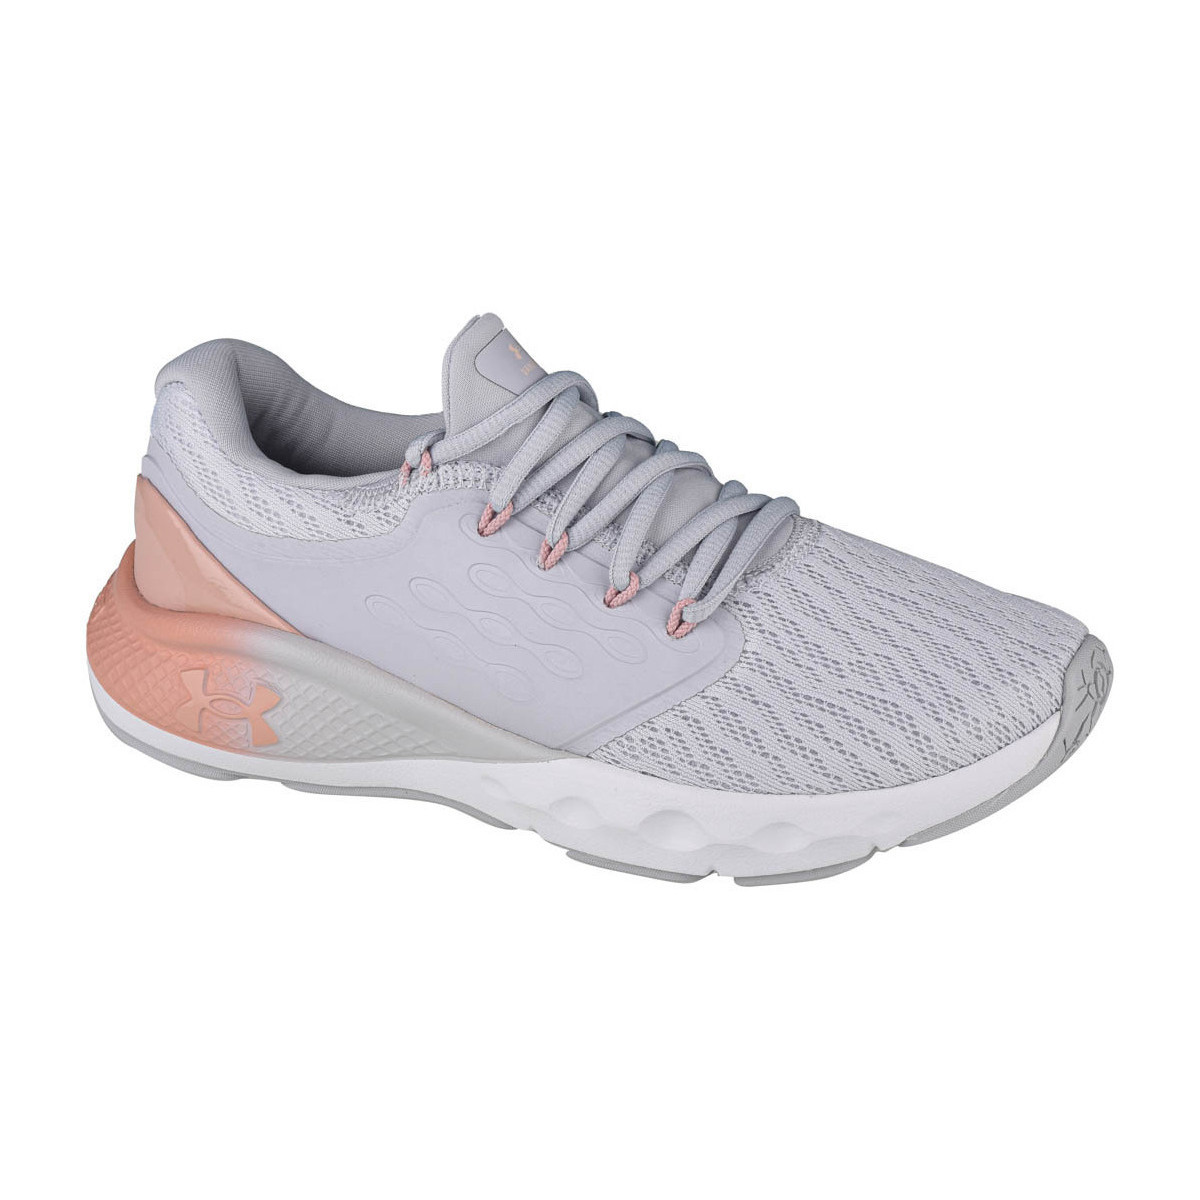 Zapatos Mujer Running / trail Under Armour W Charged Vantage Gris